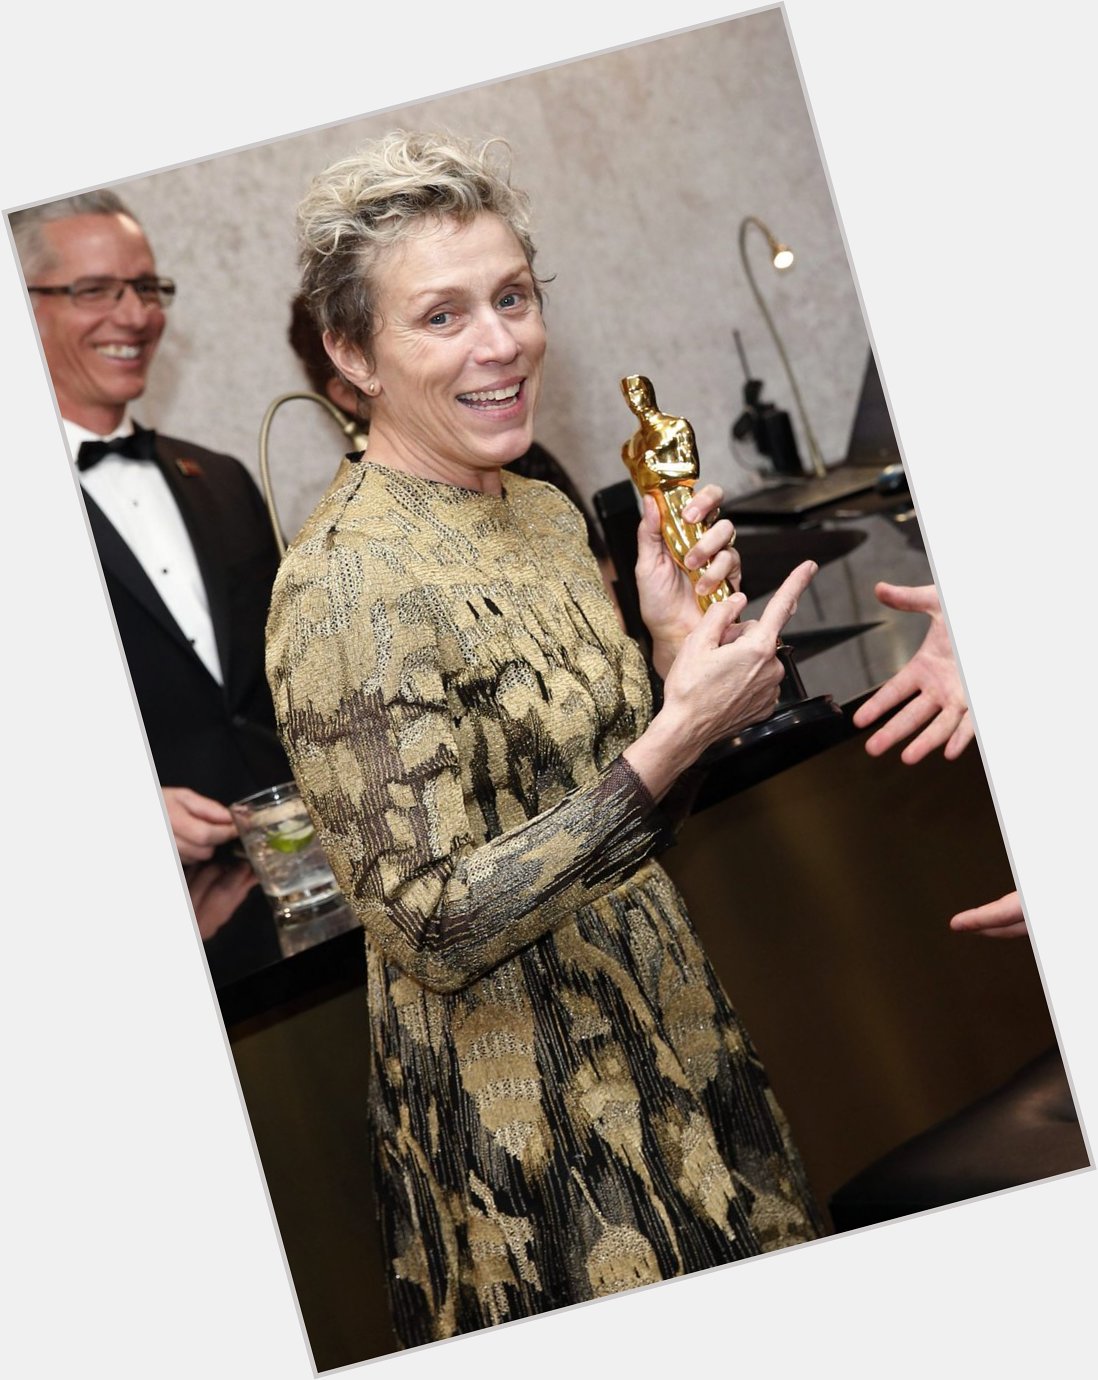 Happy Birthday 4x Academy Award winner Frances McDormand! You are one of my favourite actresses of all time  